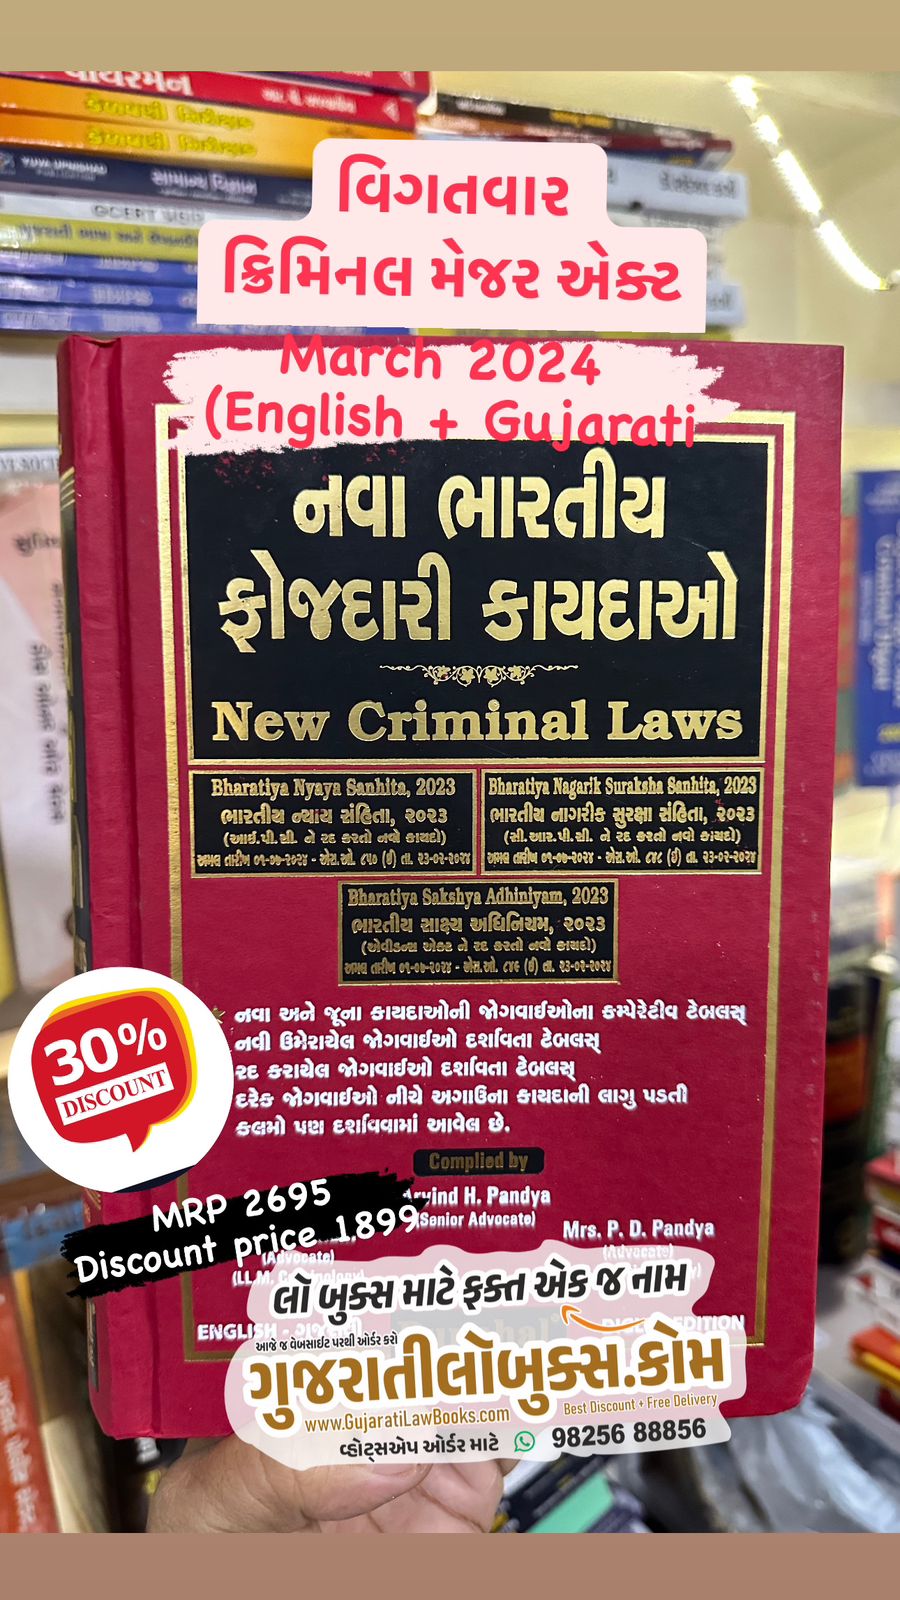 New Criminal Major Acts - New Criminal Laws (BNS I BNSS I BSA) in English + Gujarati - Latest March 2024 Edition